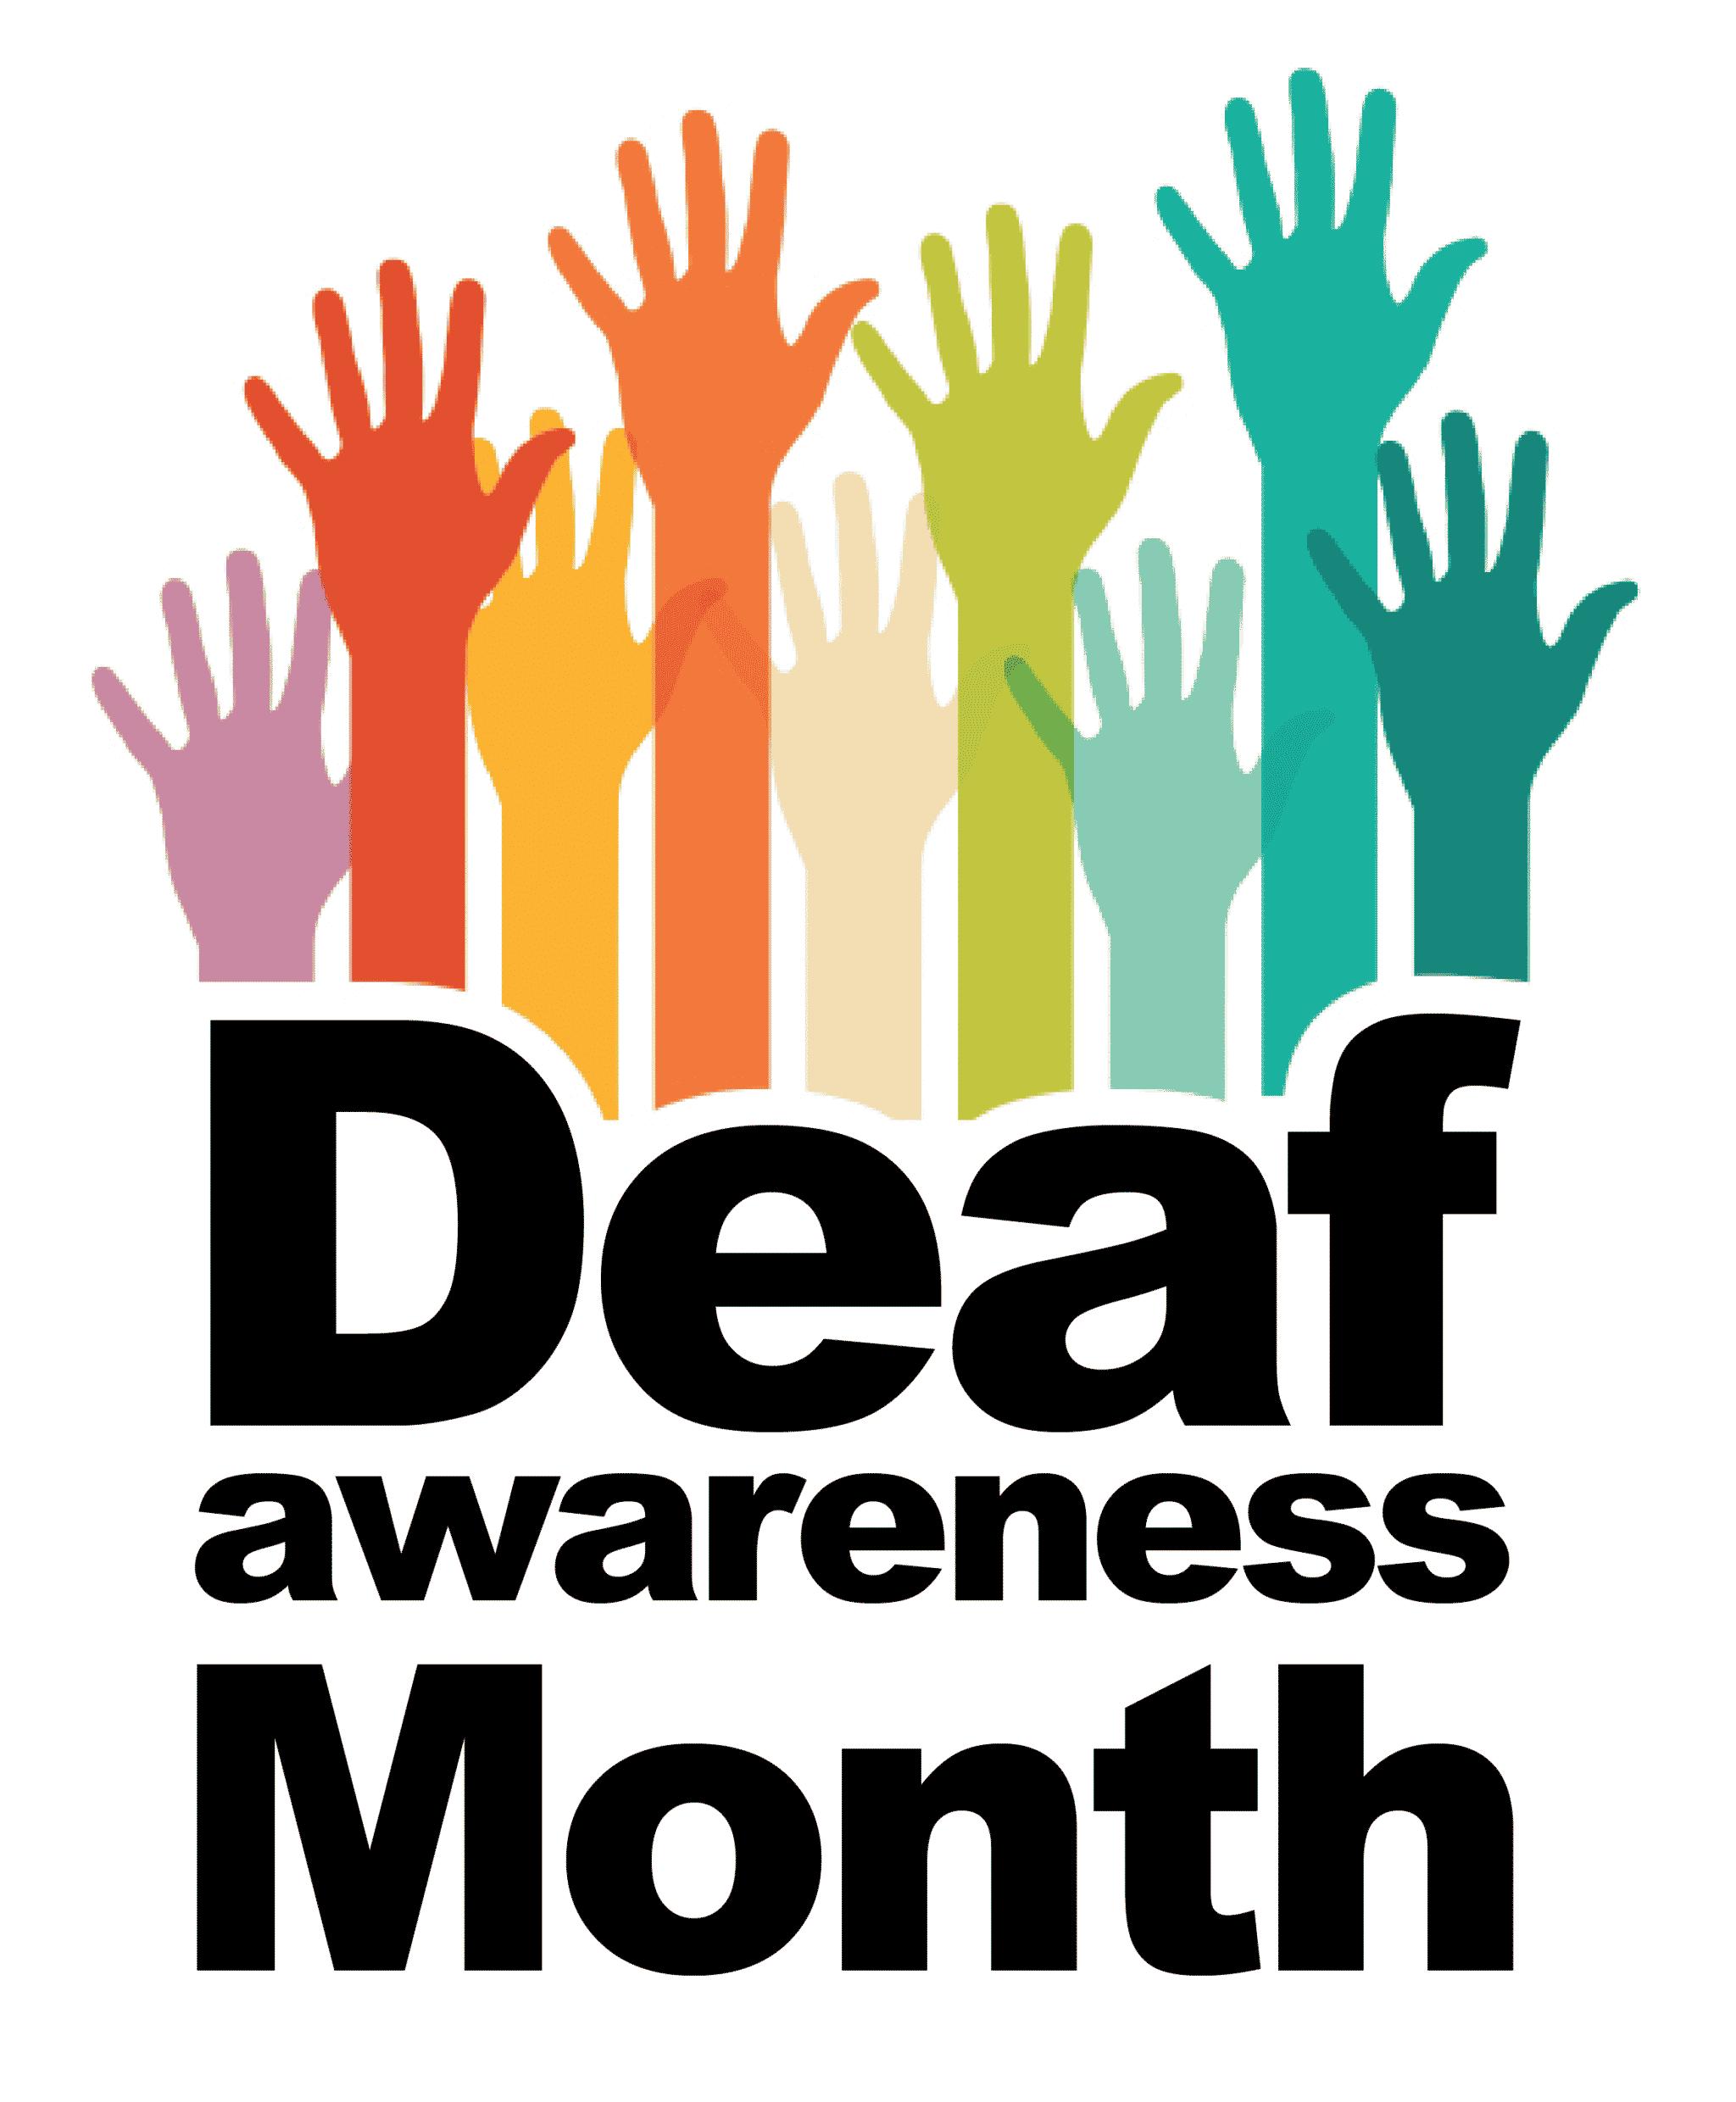 deaf awareness month image showing multicolored hands reaching out